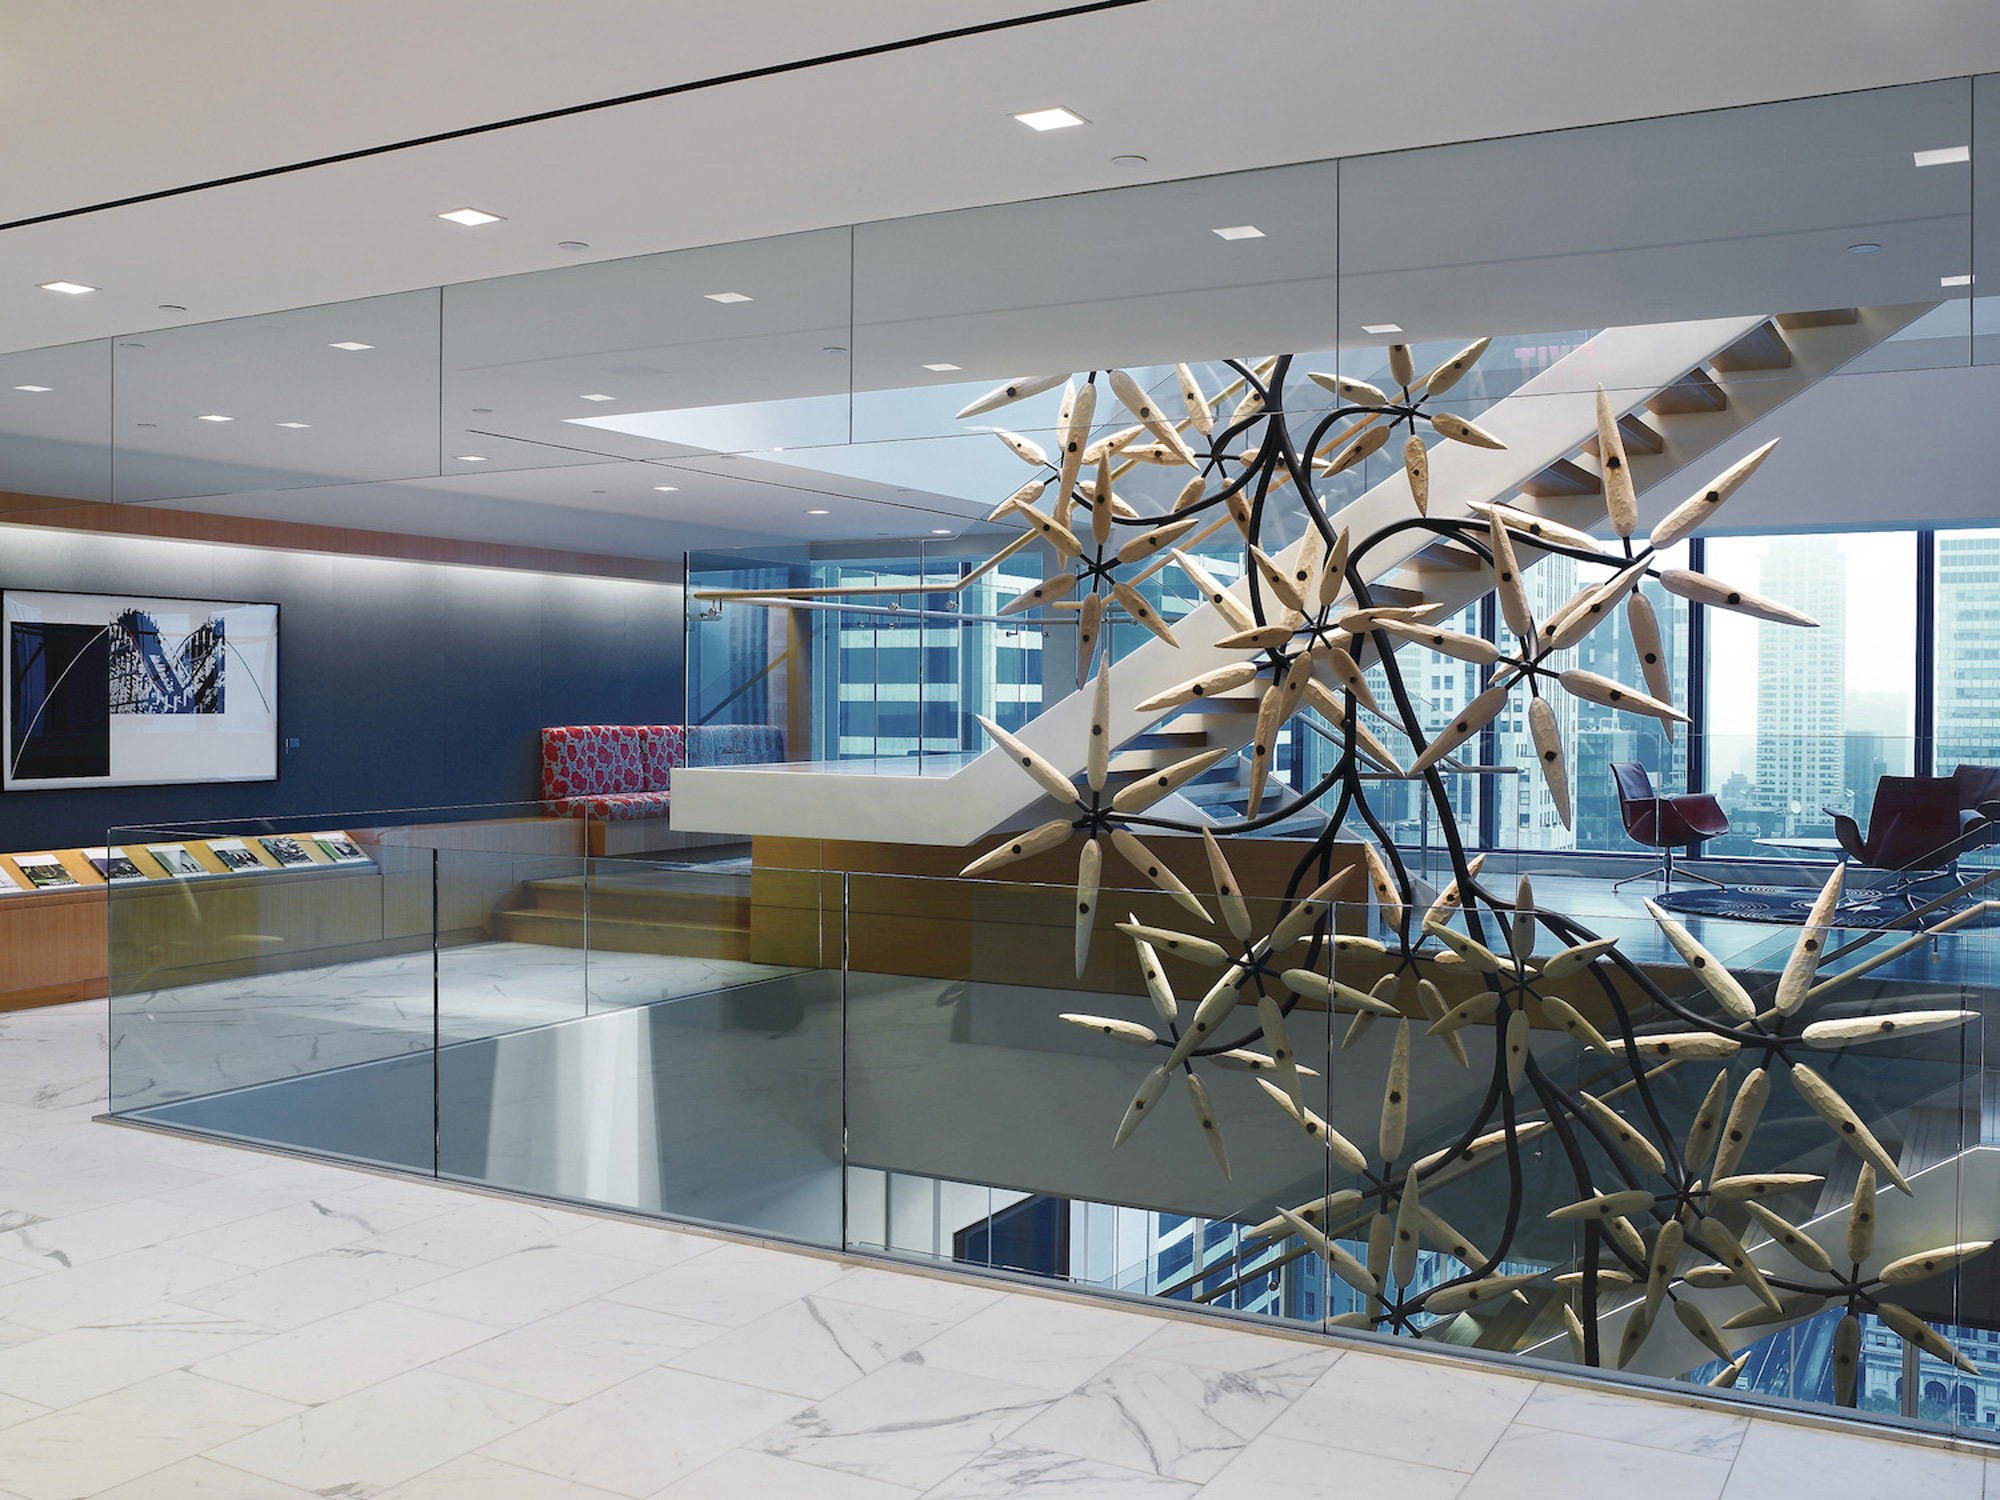 Modern office lobby featuring a geometric wooden sculpture suspended above a glass partition. The space showcases a monochromatic marble floor, minimalist furniture, and expansive city views through floor-to-ceiling windows.